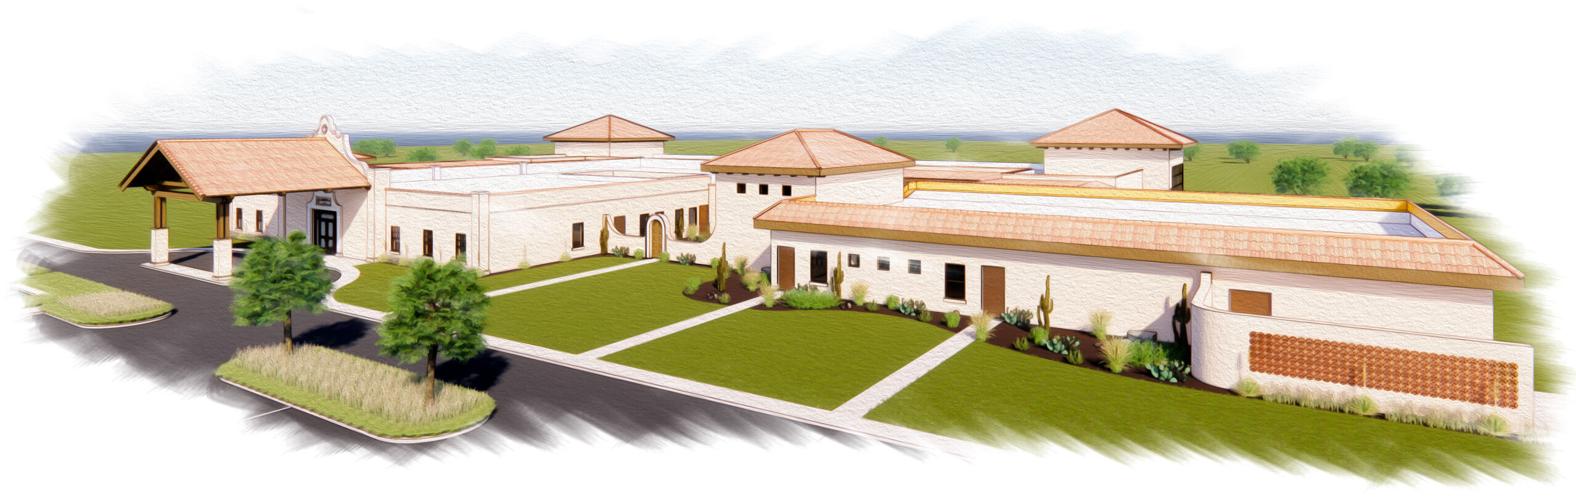 Billy T. Cattan Recovery inpatient facility rendering